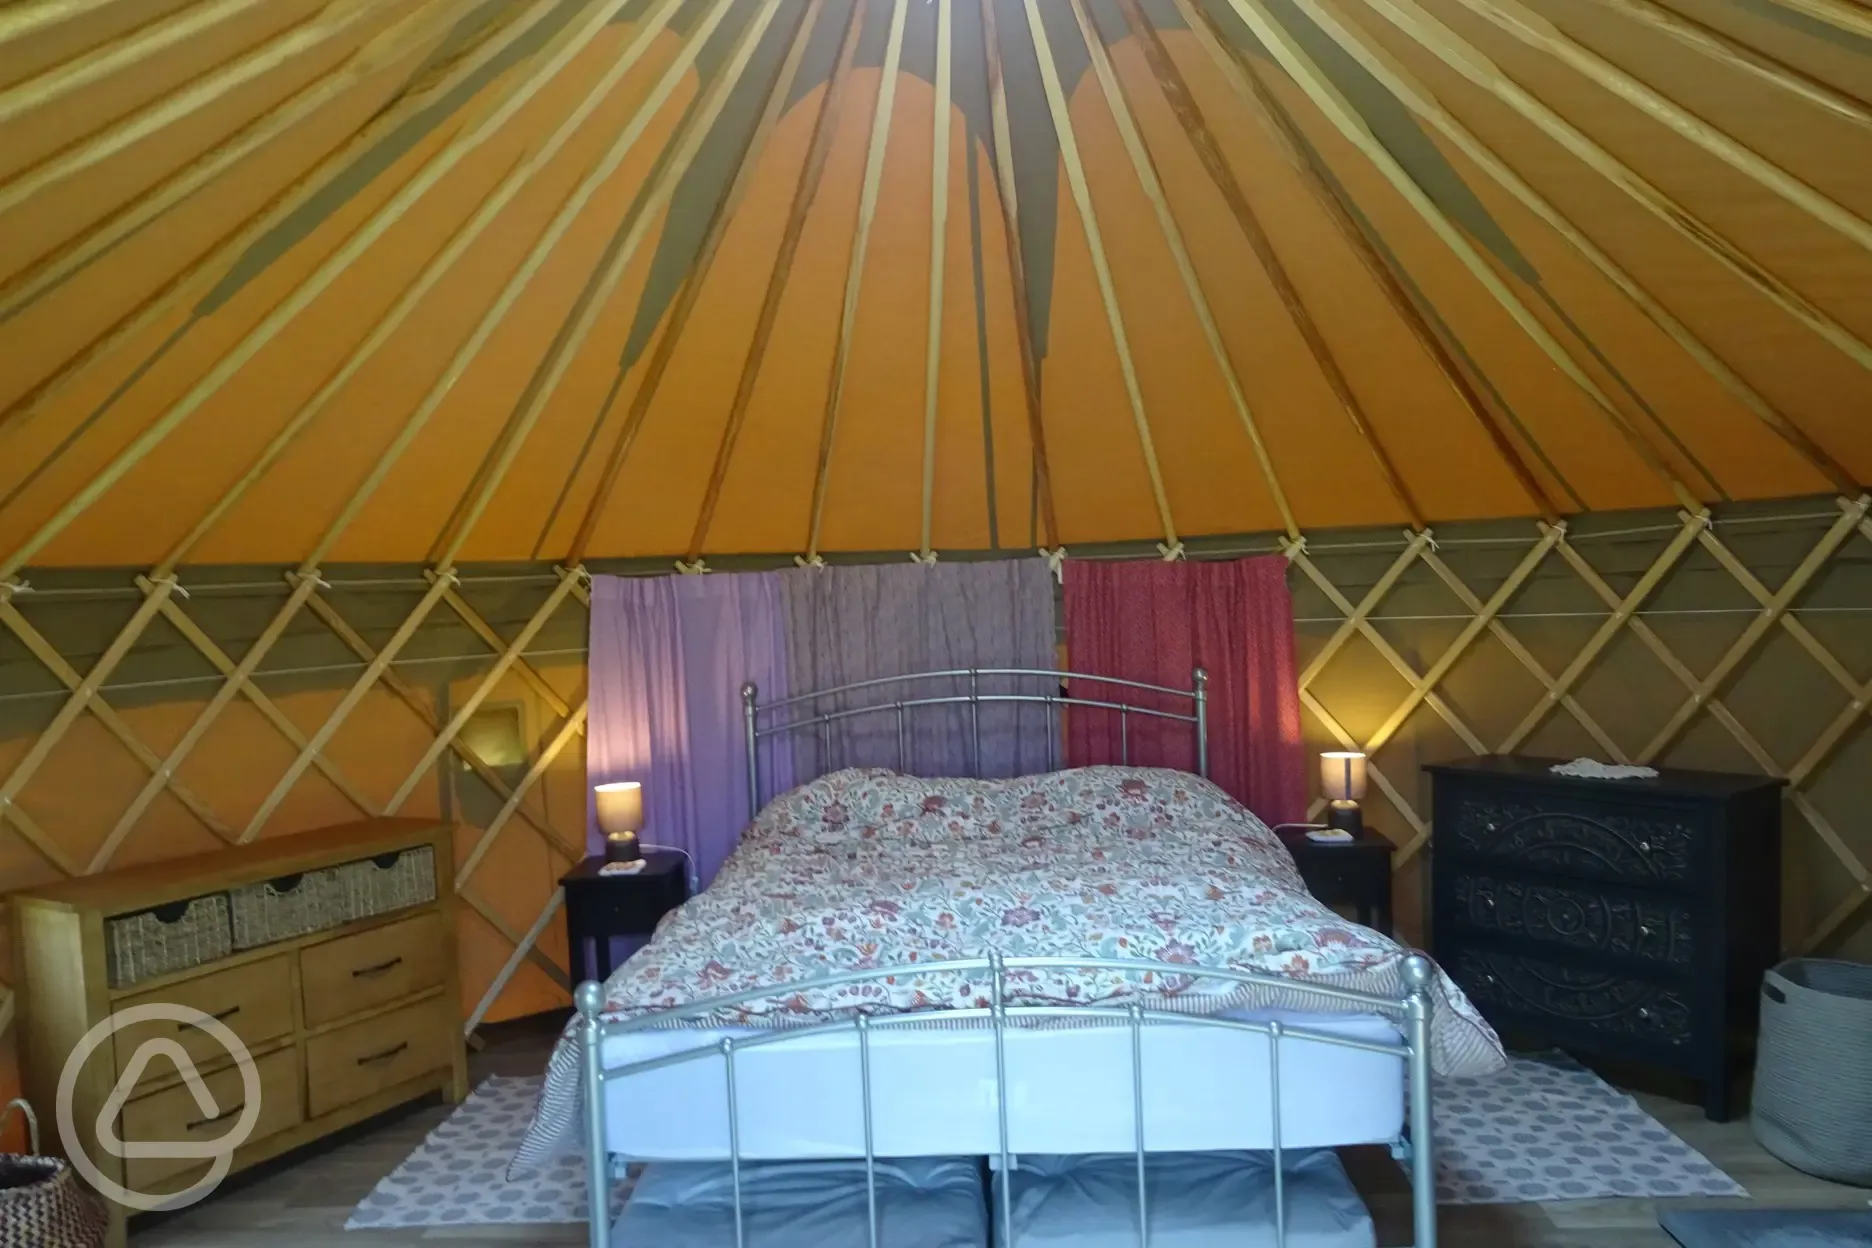 Violet yurt will pull out mattresses under the king sized bed